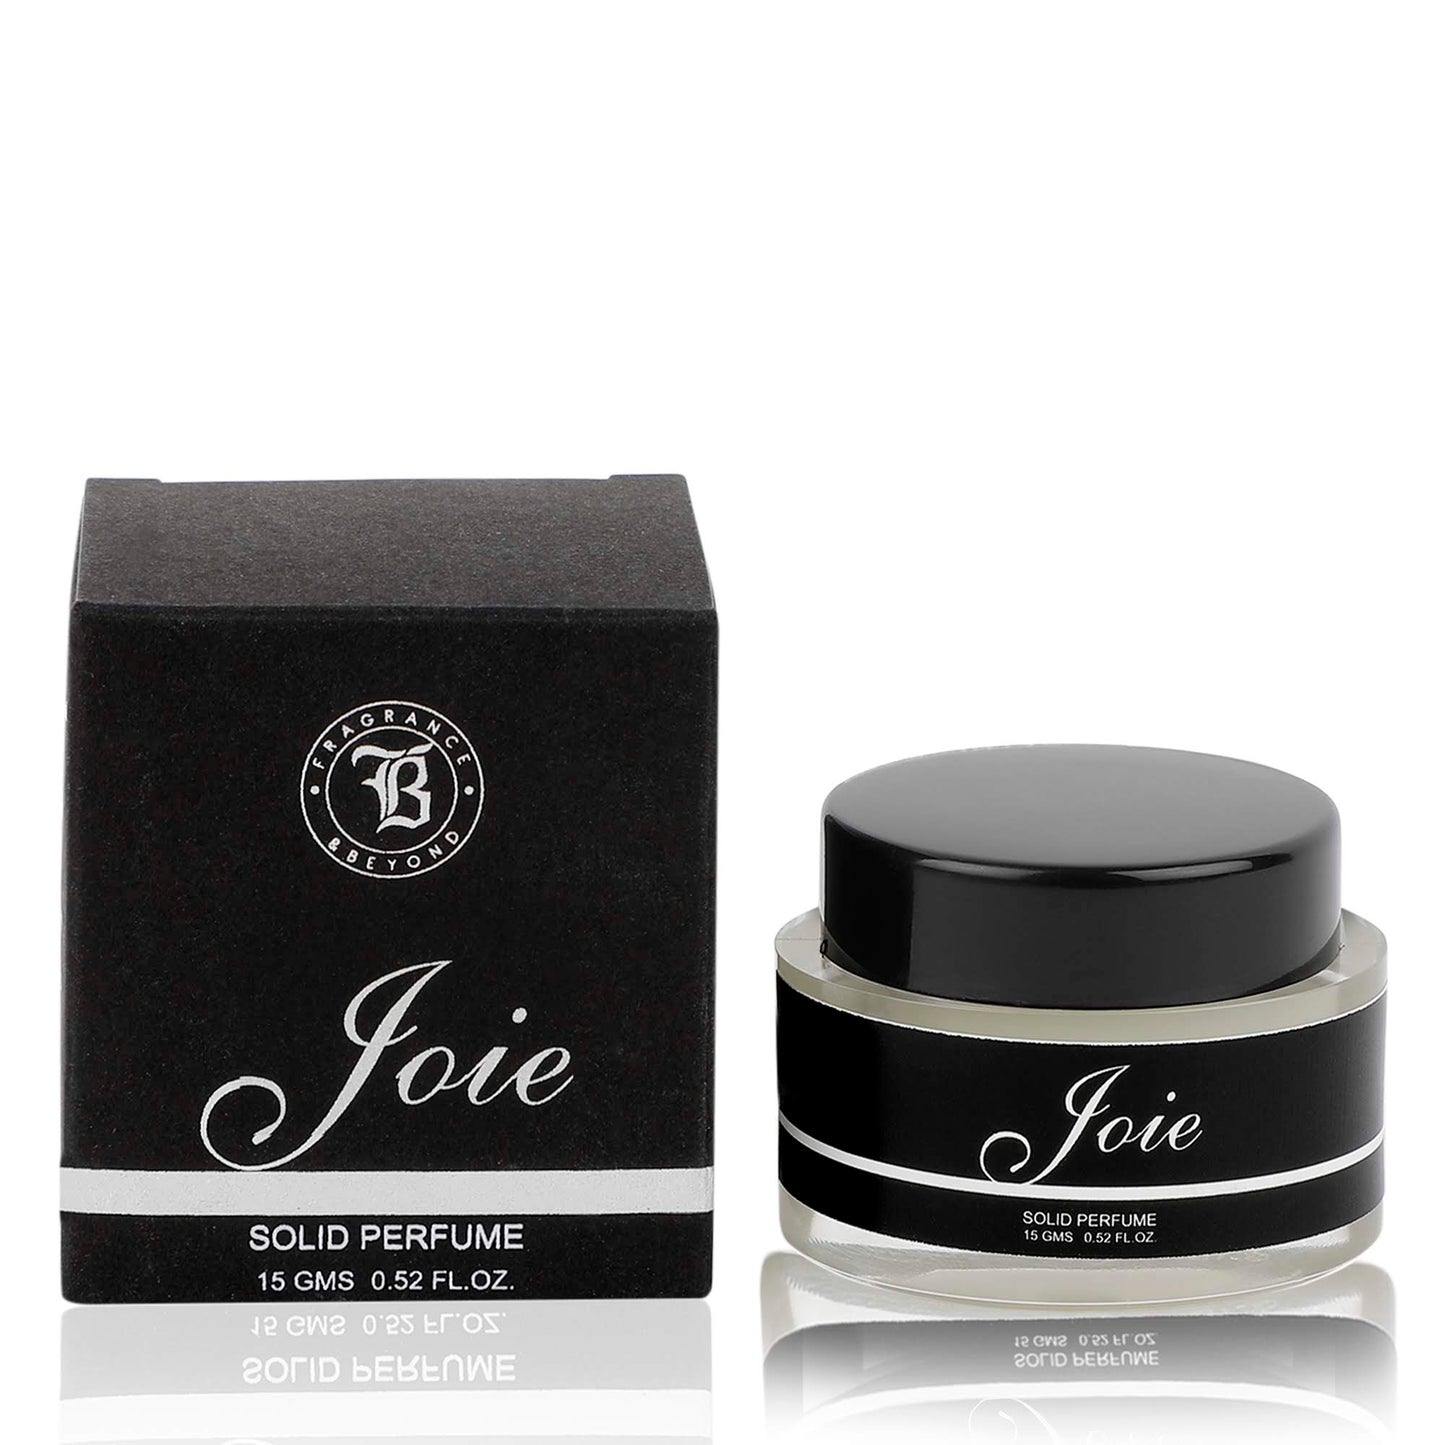 Joie Solid Perfume for Men, 15 Gms